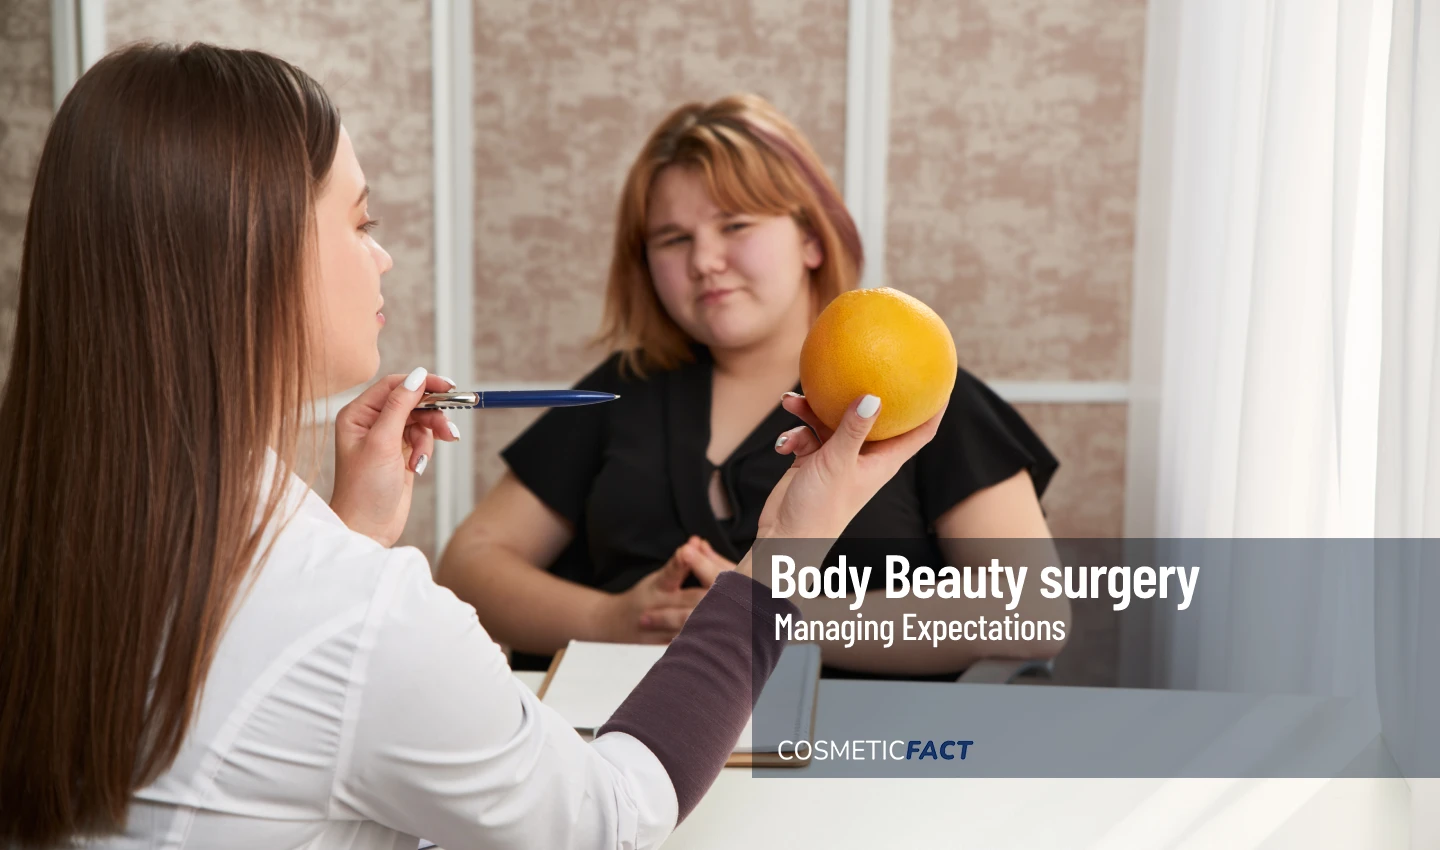 A patient and doctor are discussing body beauty surgery expectations while the doctor holds up a fruit as an analogy for setting realistic expectations